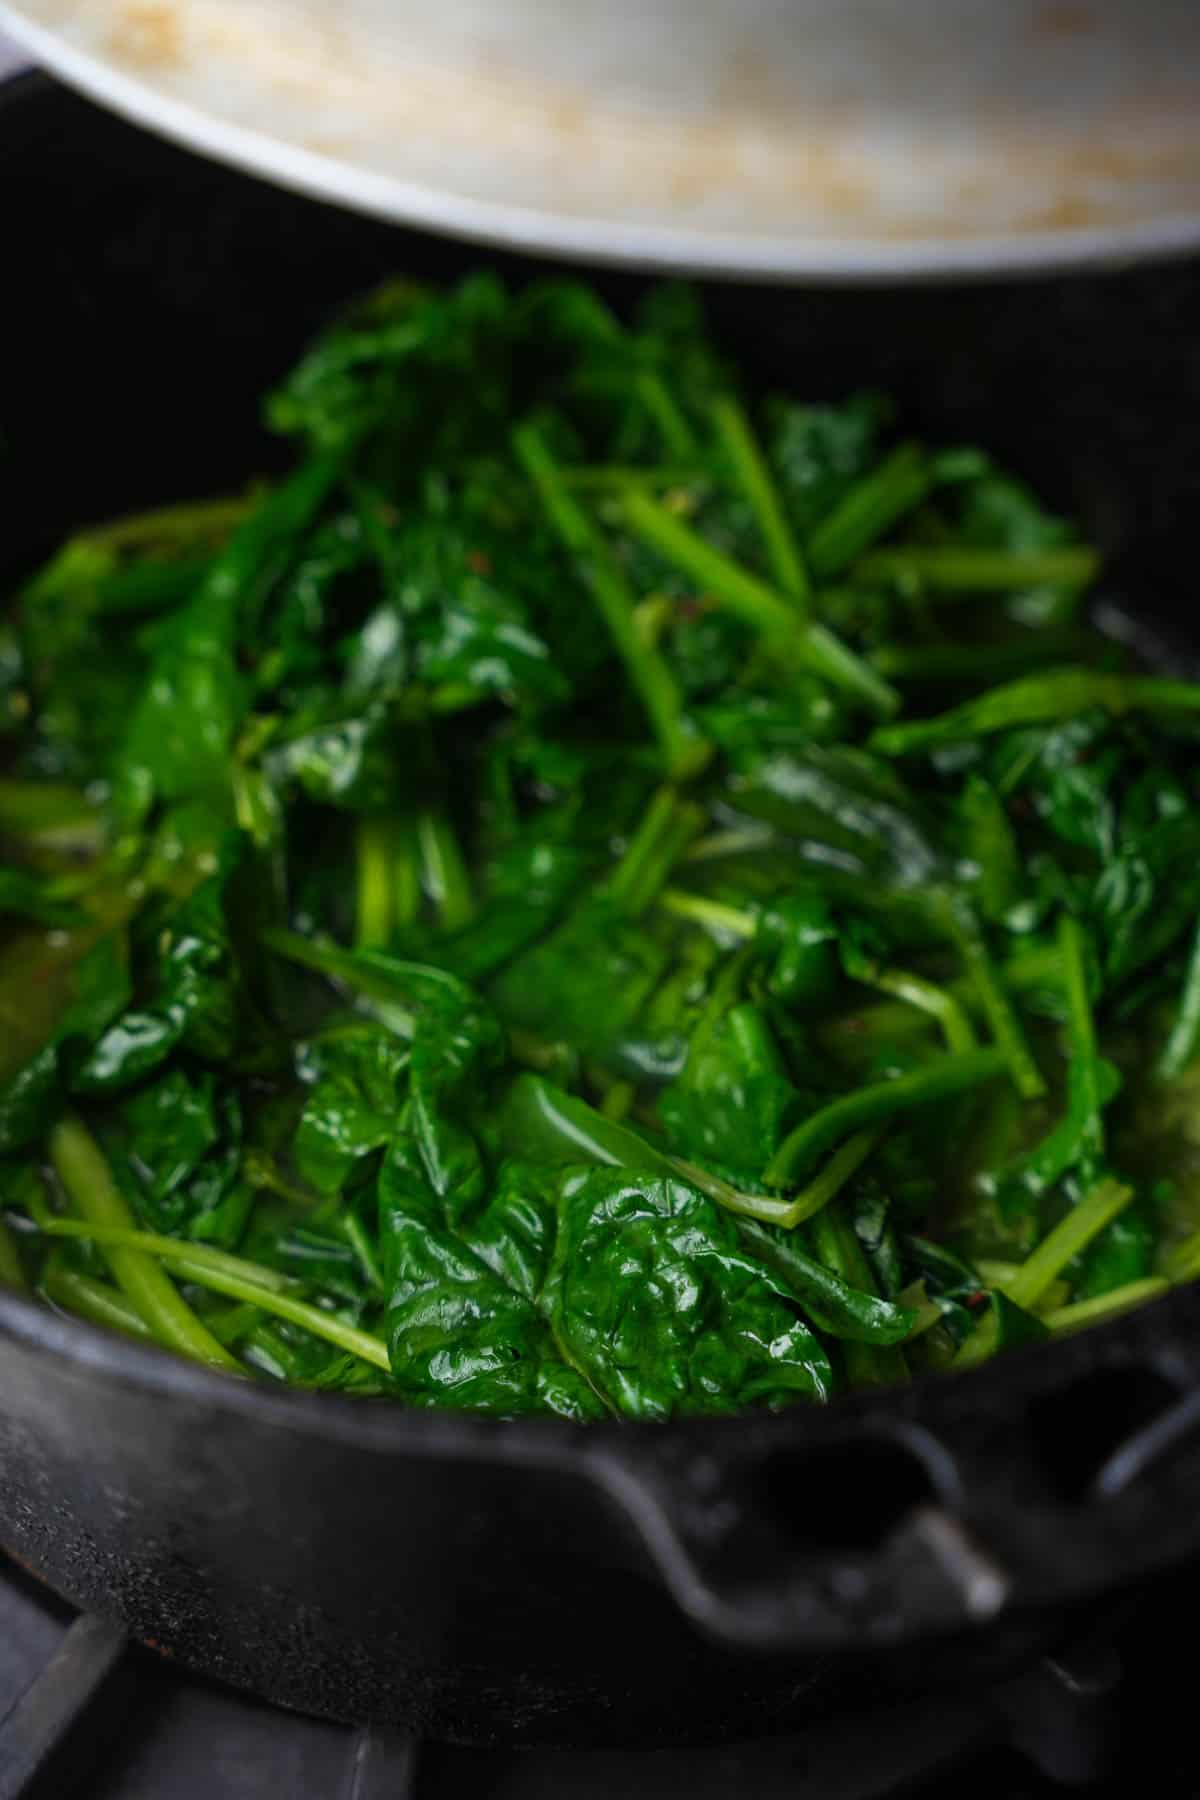 A lid is placed onto the cooking spinach so that it can steam as it cooks.